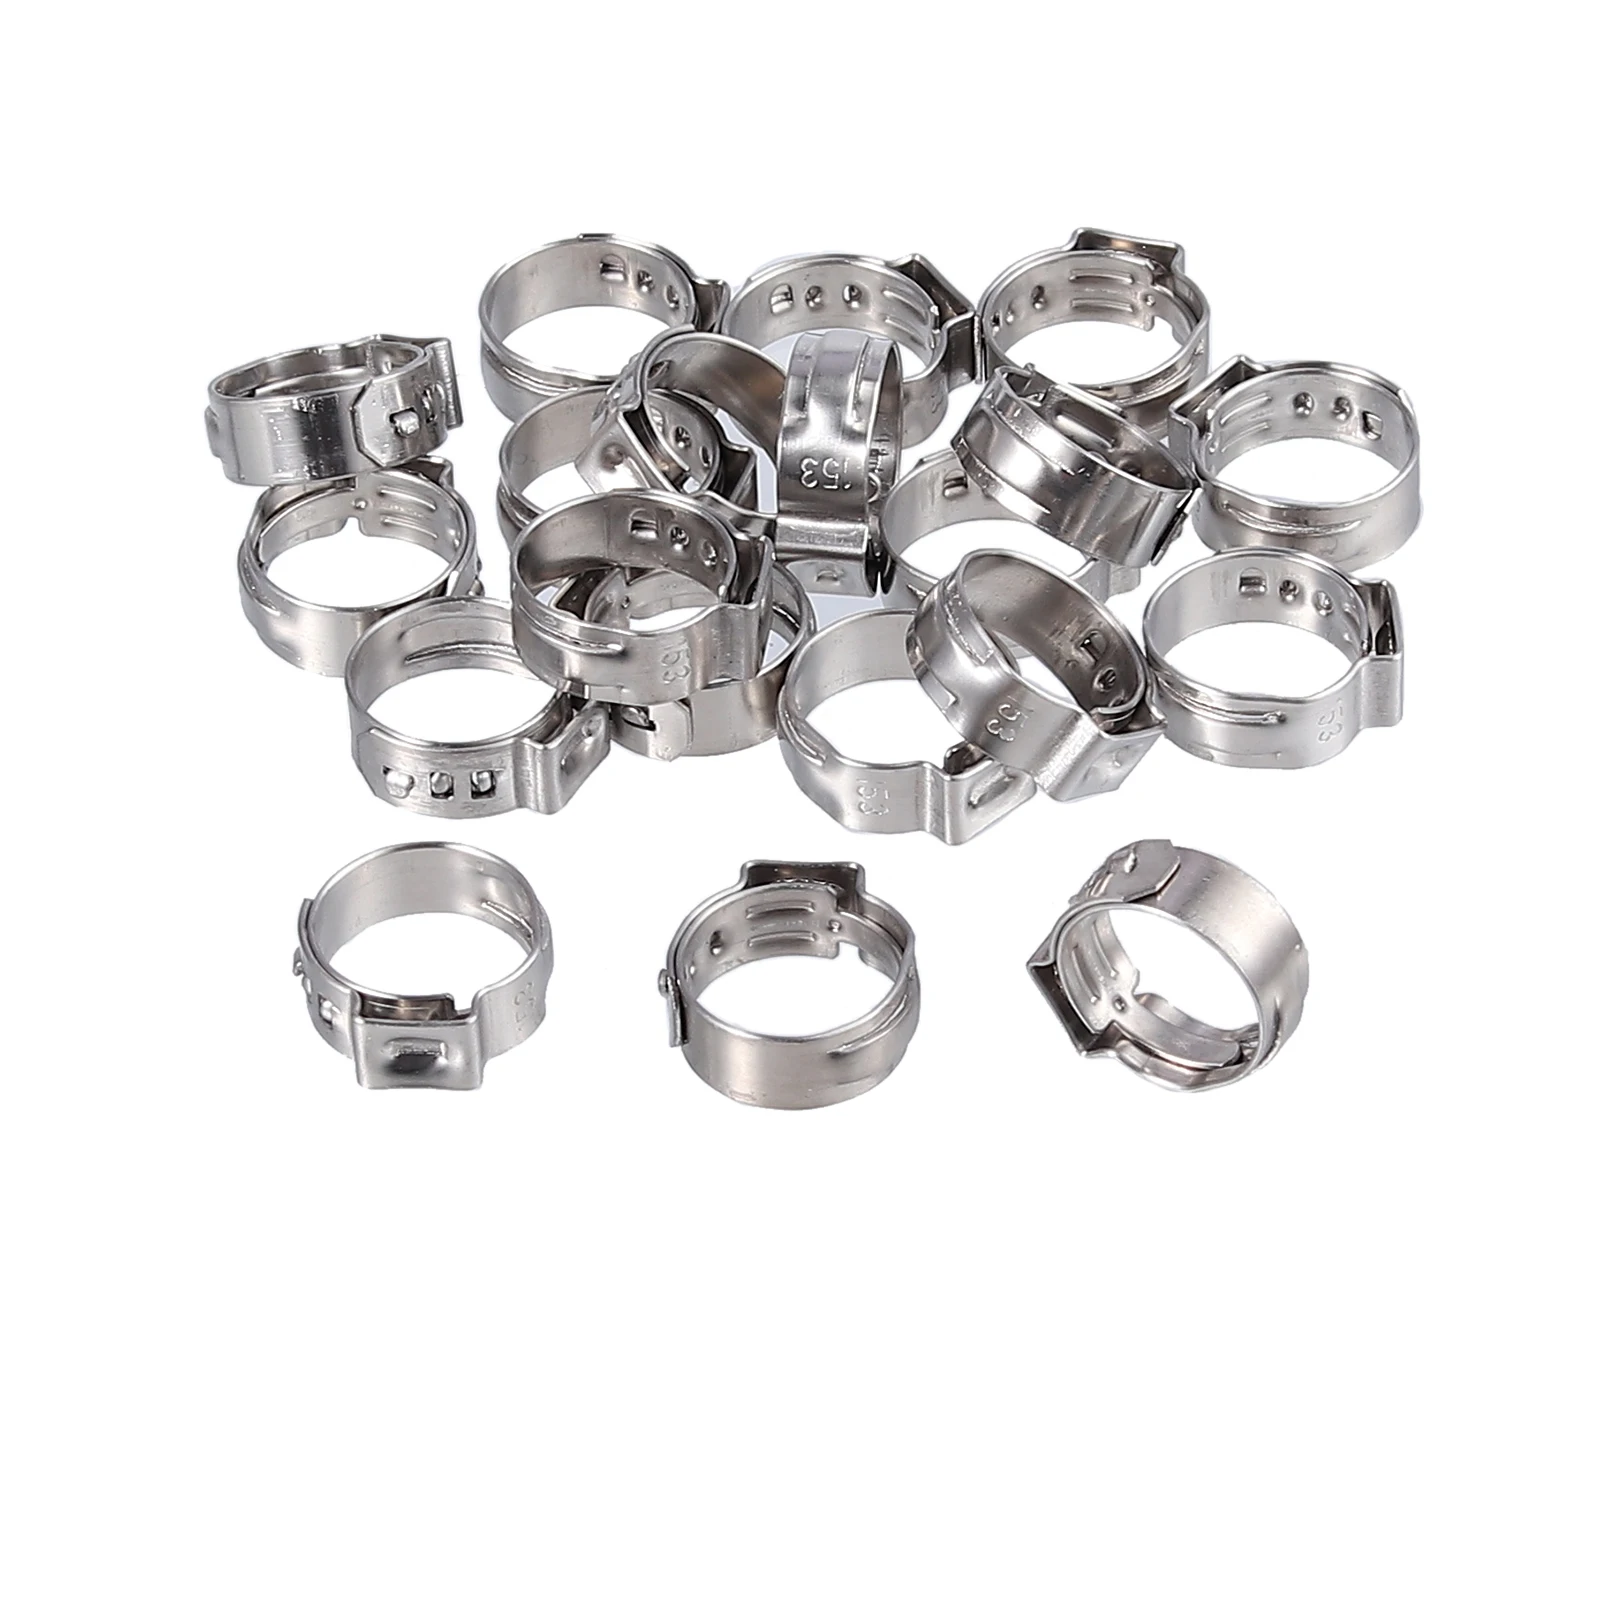 130Pcs 5.8-21mm Single Ear Stepless Hose Clamps Assortment Cinch Clamp Rings C#